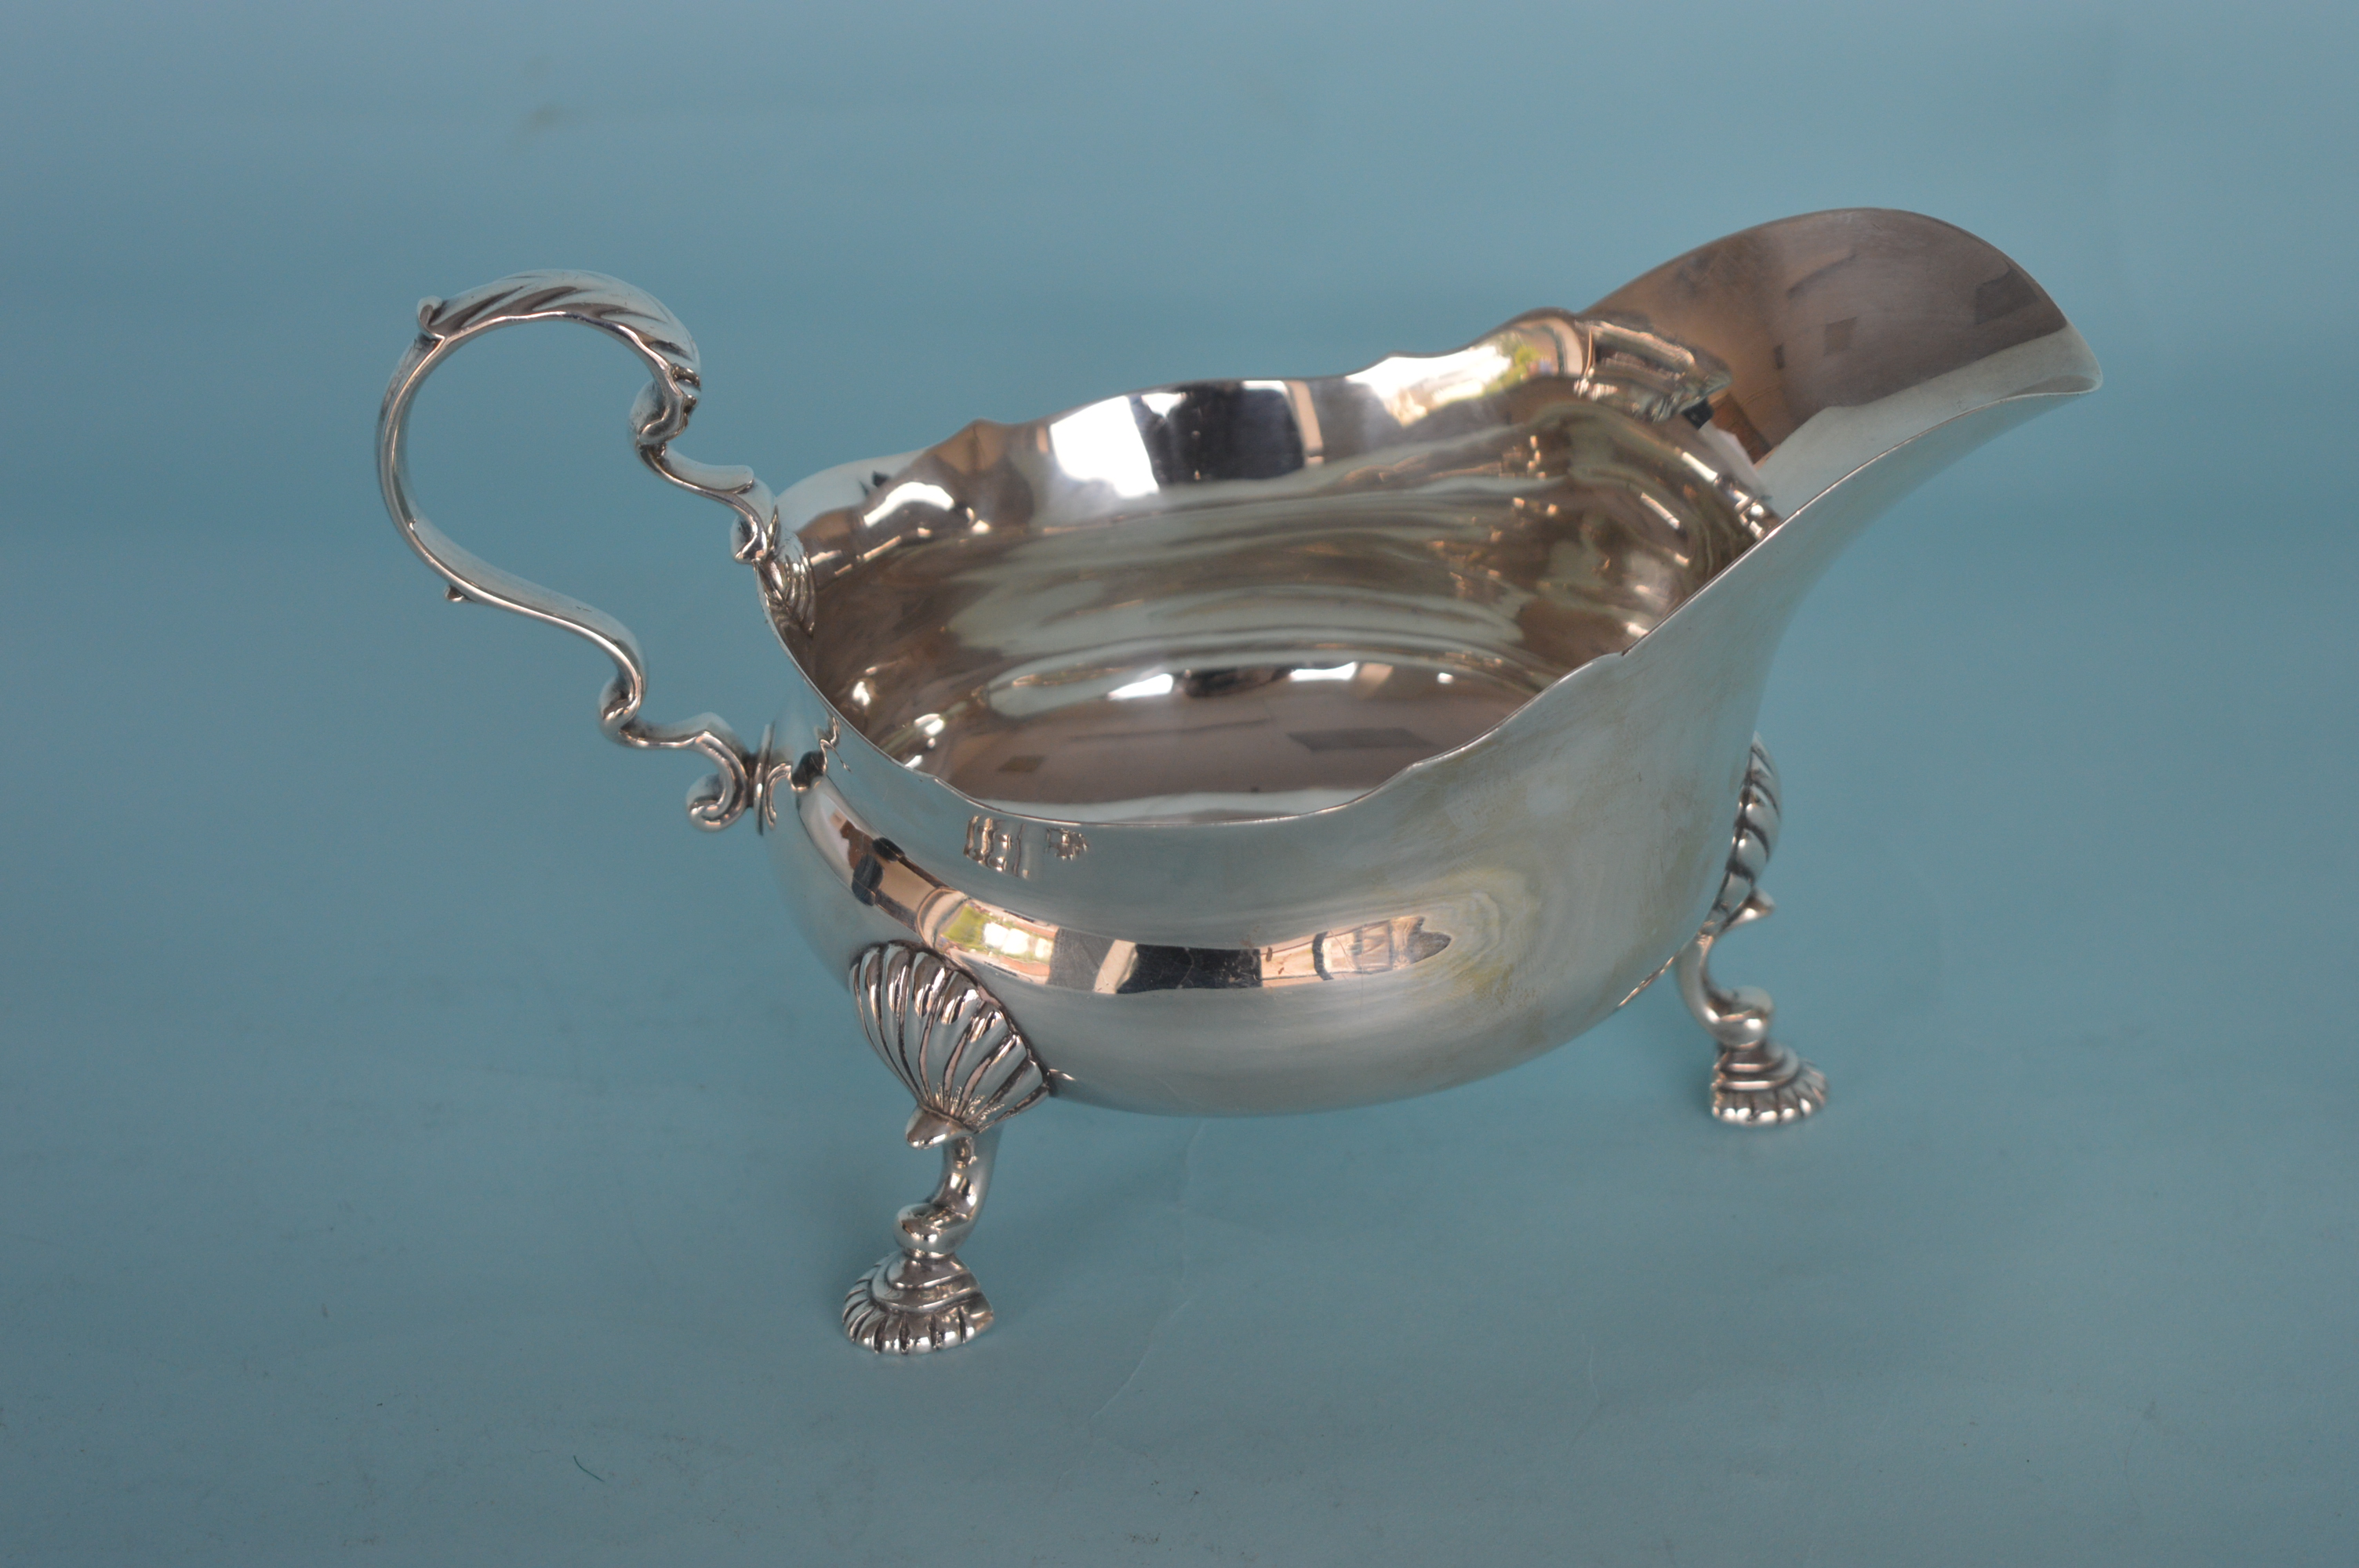 A small Edwardian sauce boat with card ct rim. She